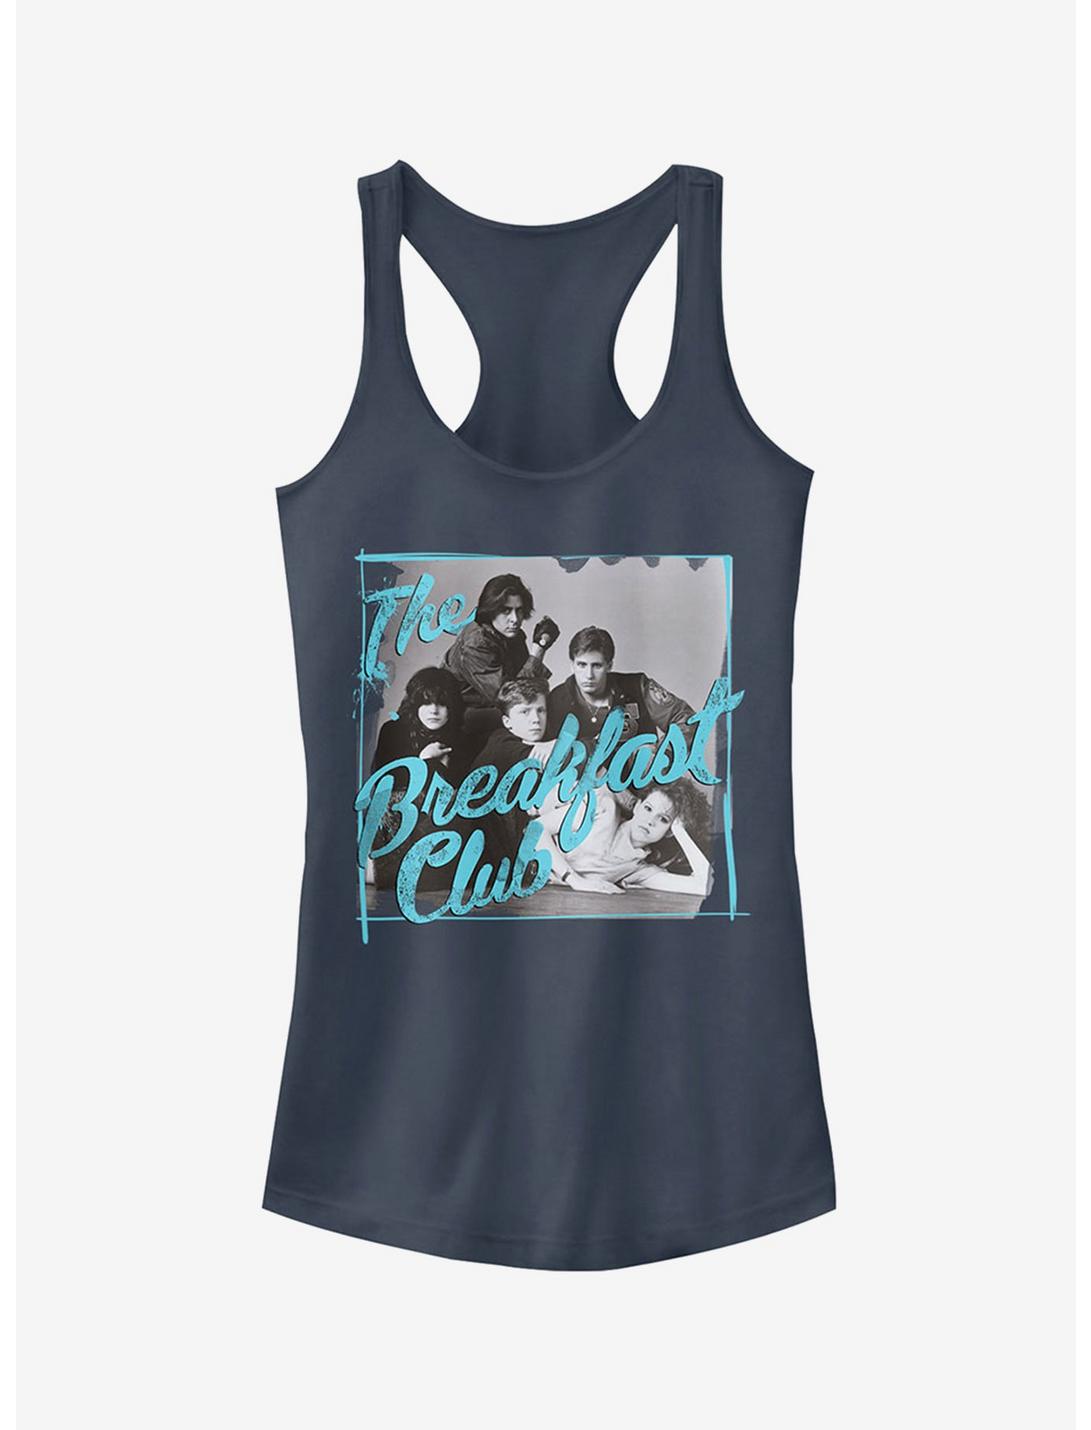 The Breakfast Club Grayscale Character Pose Girls Tank Top, INDIGO, hi-res